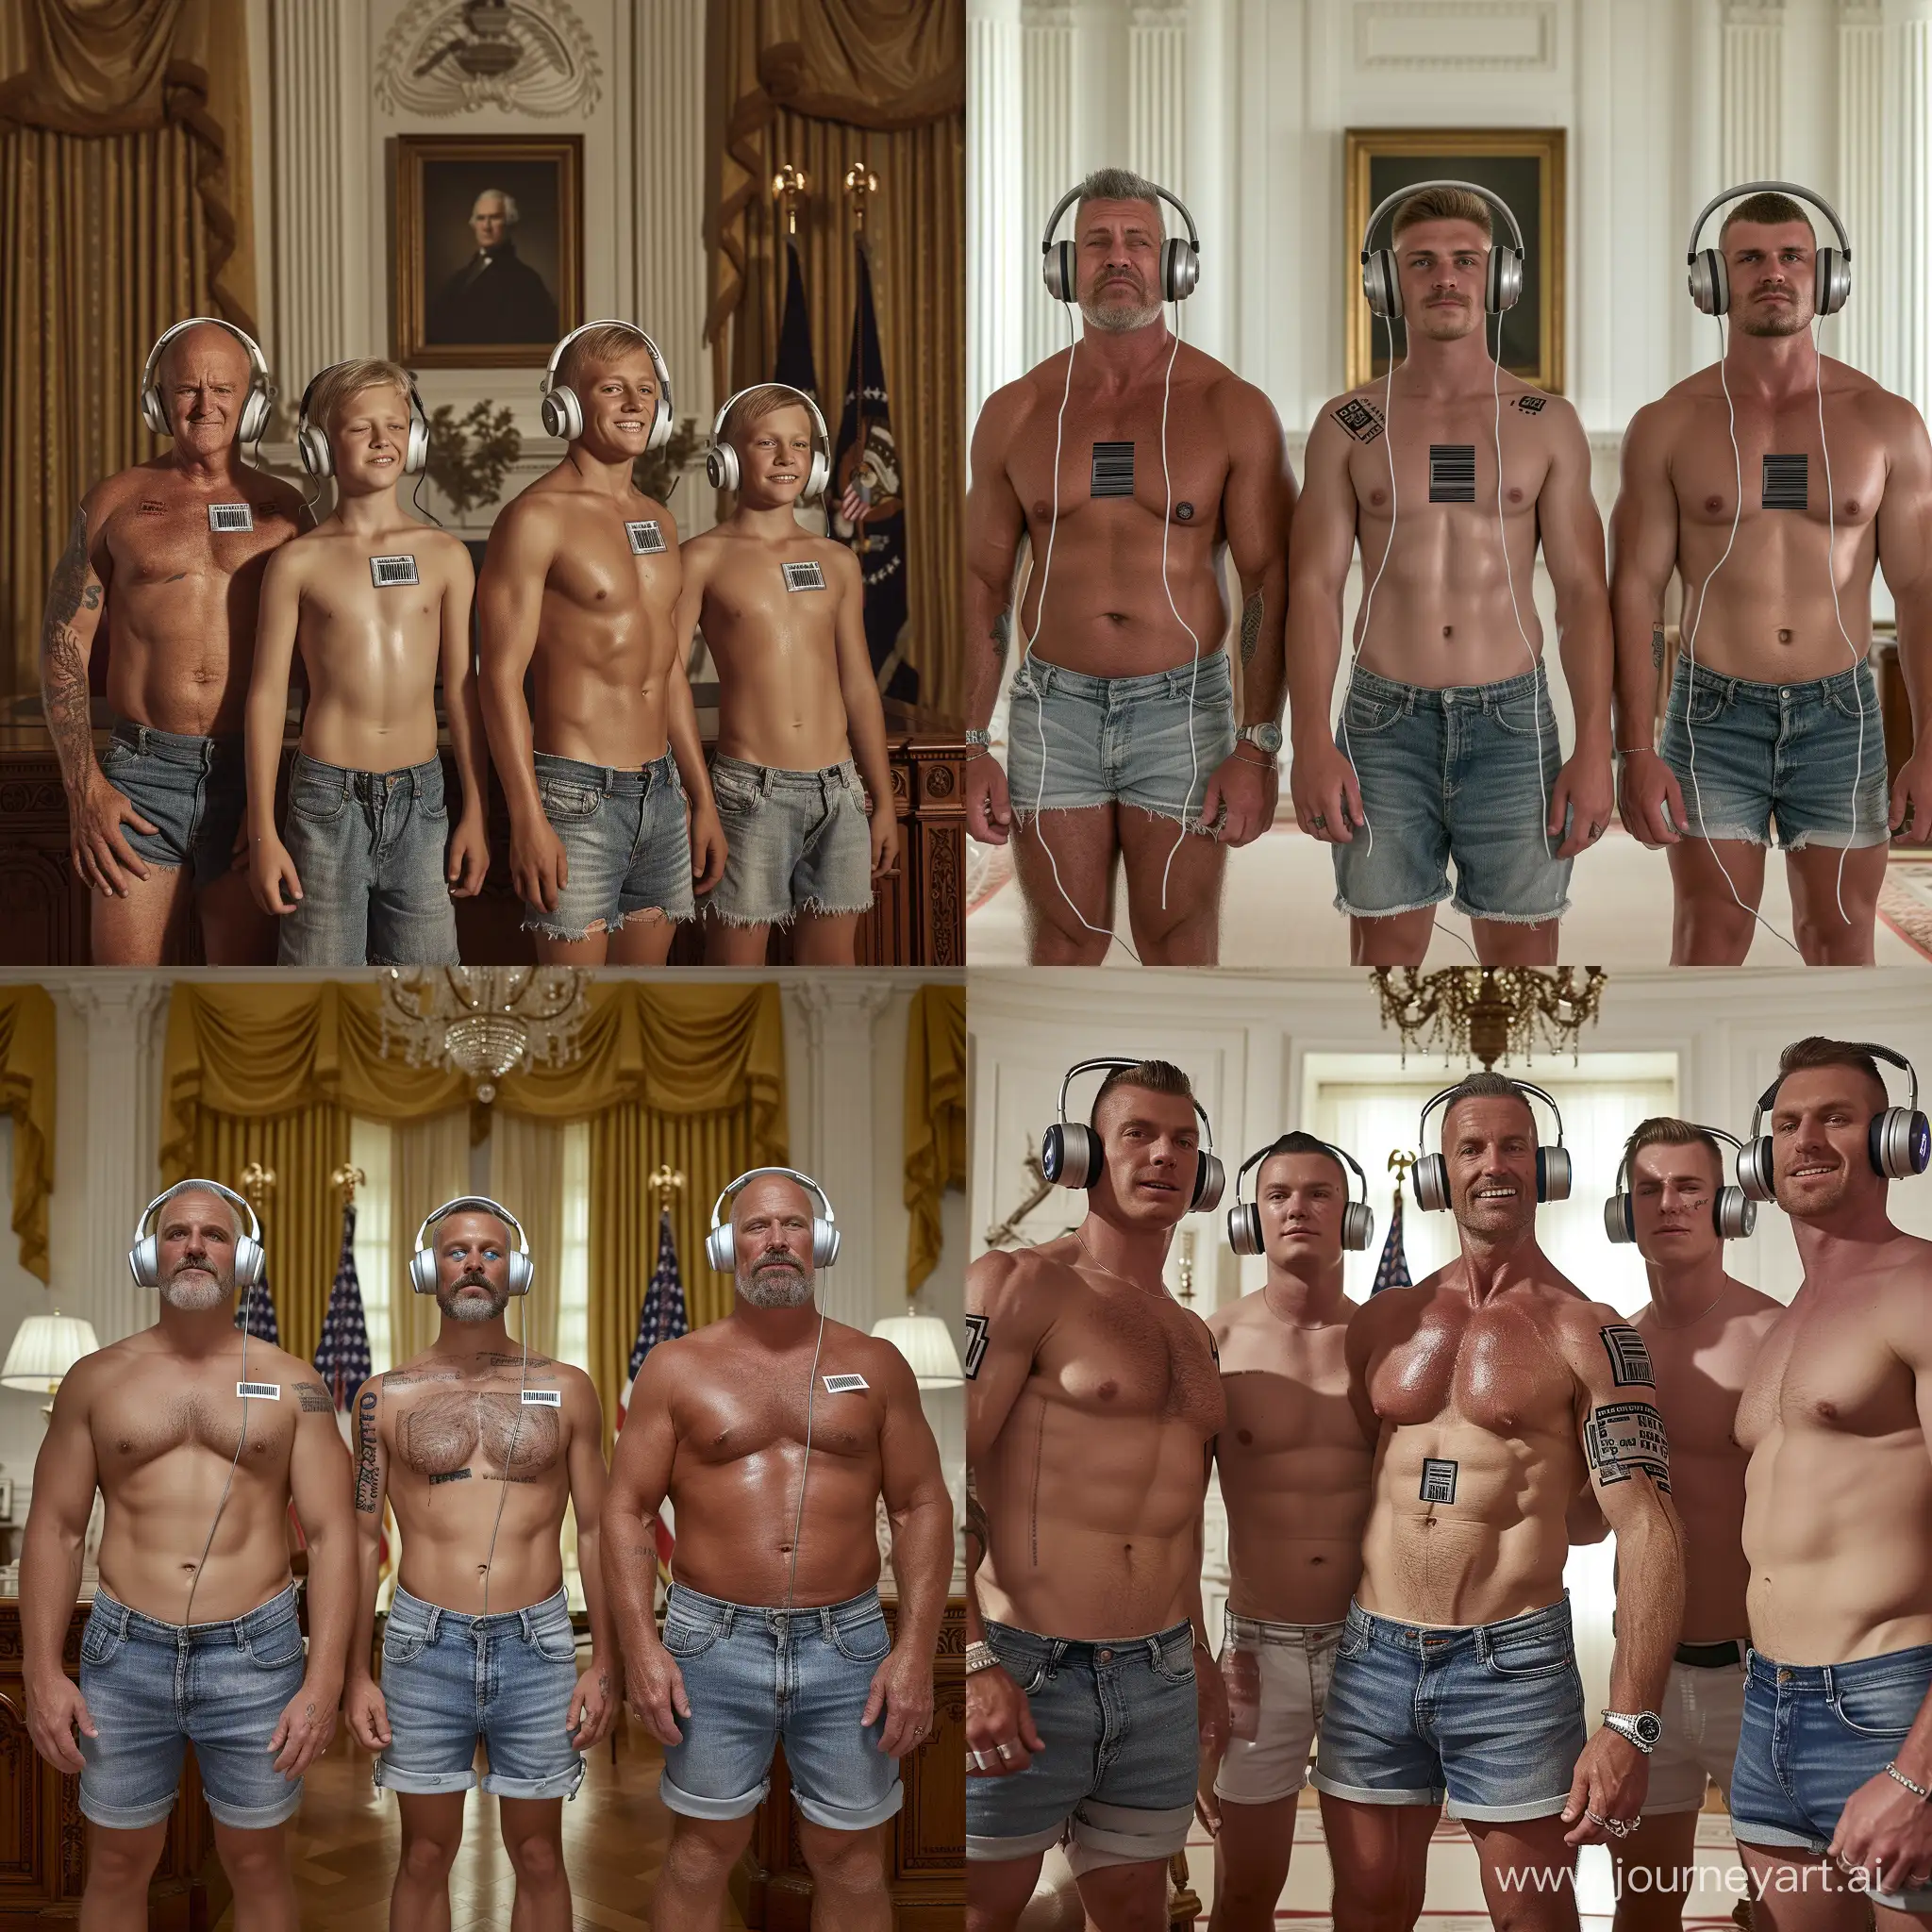 Handsome muscular middle-aged men and handsome muscular college-age boys each wear silver headphones and fitted denim cutoff shorts, dazed smiles, small barcode tattooed on each man's chest, White House Oval Office setting, facing the viewer, mass indoctrination, hyperrealistic, cinematic